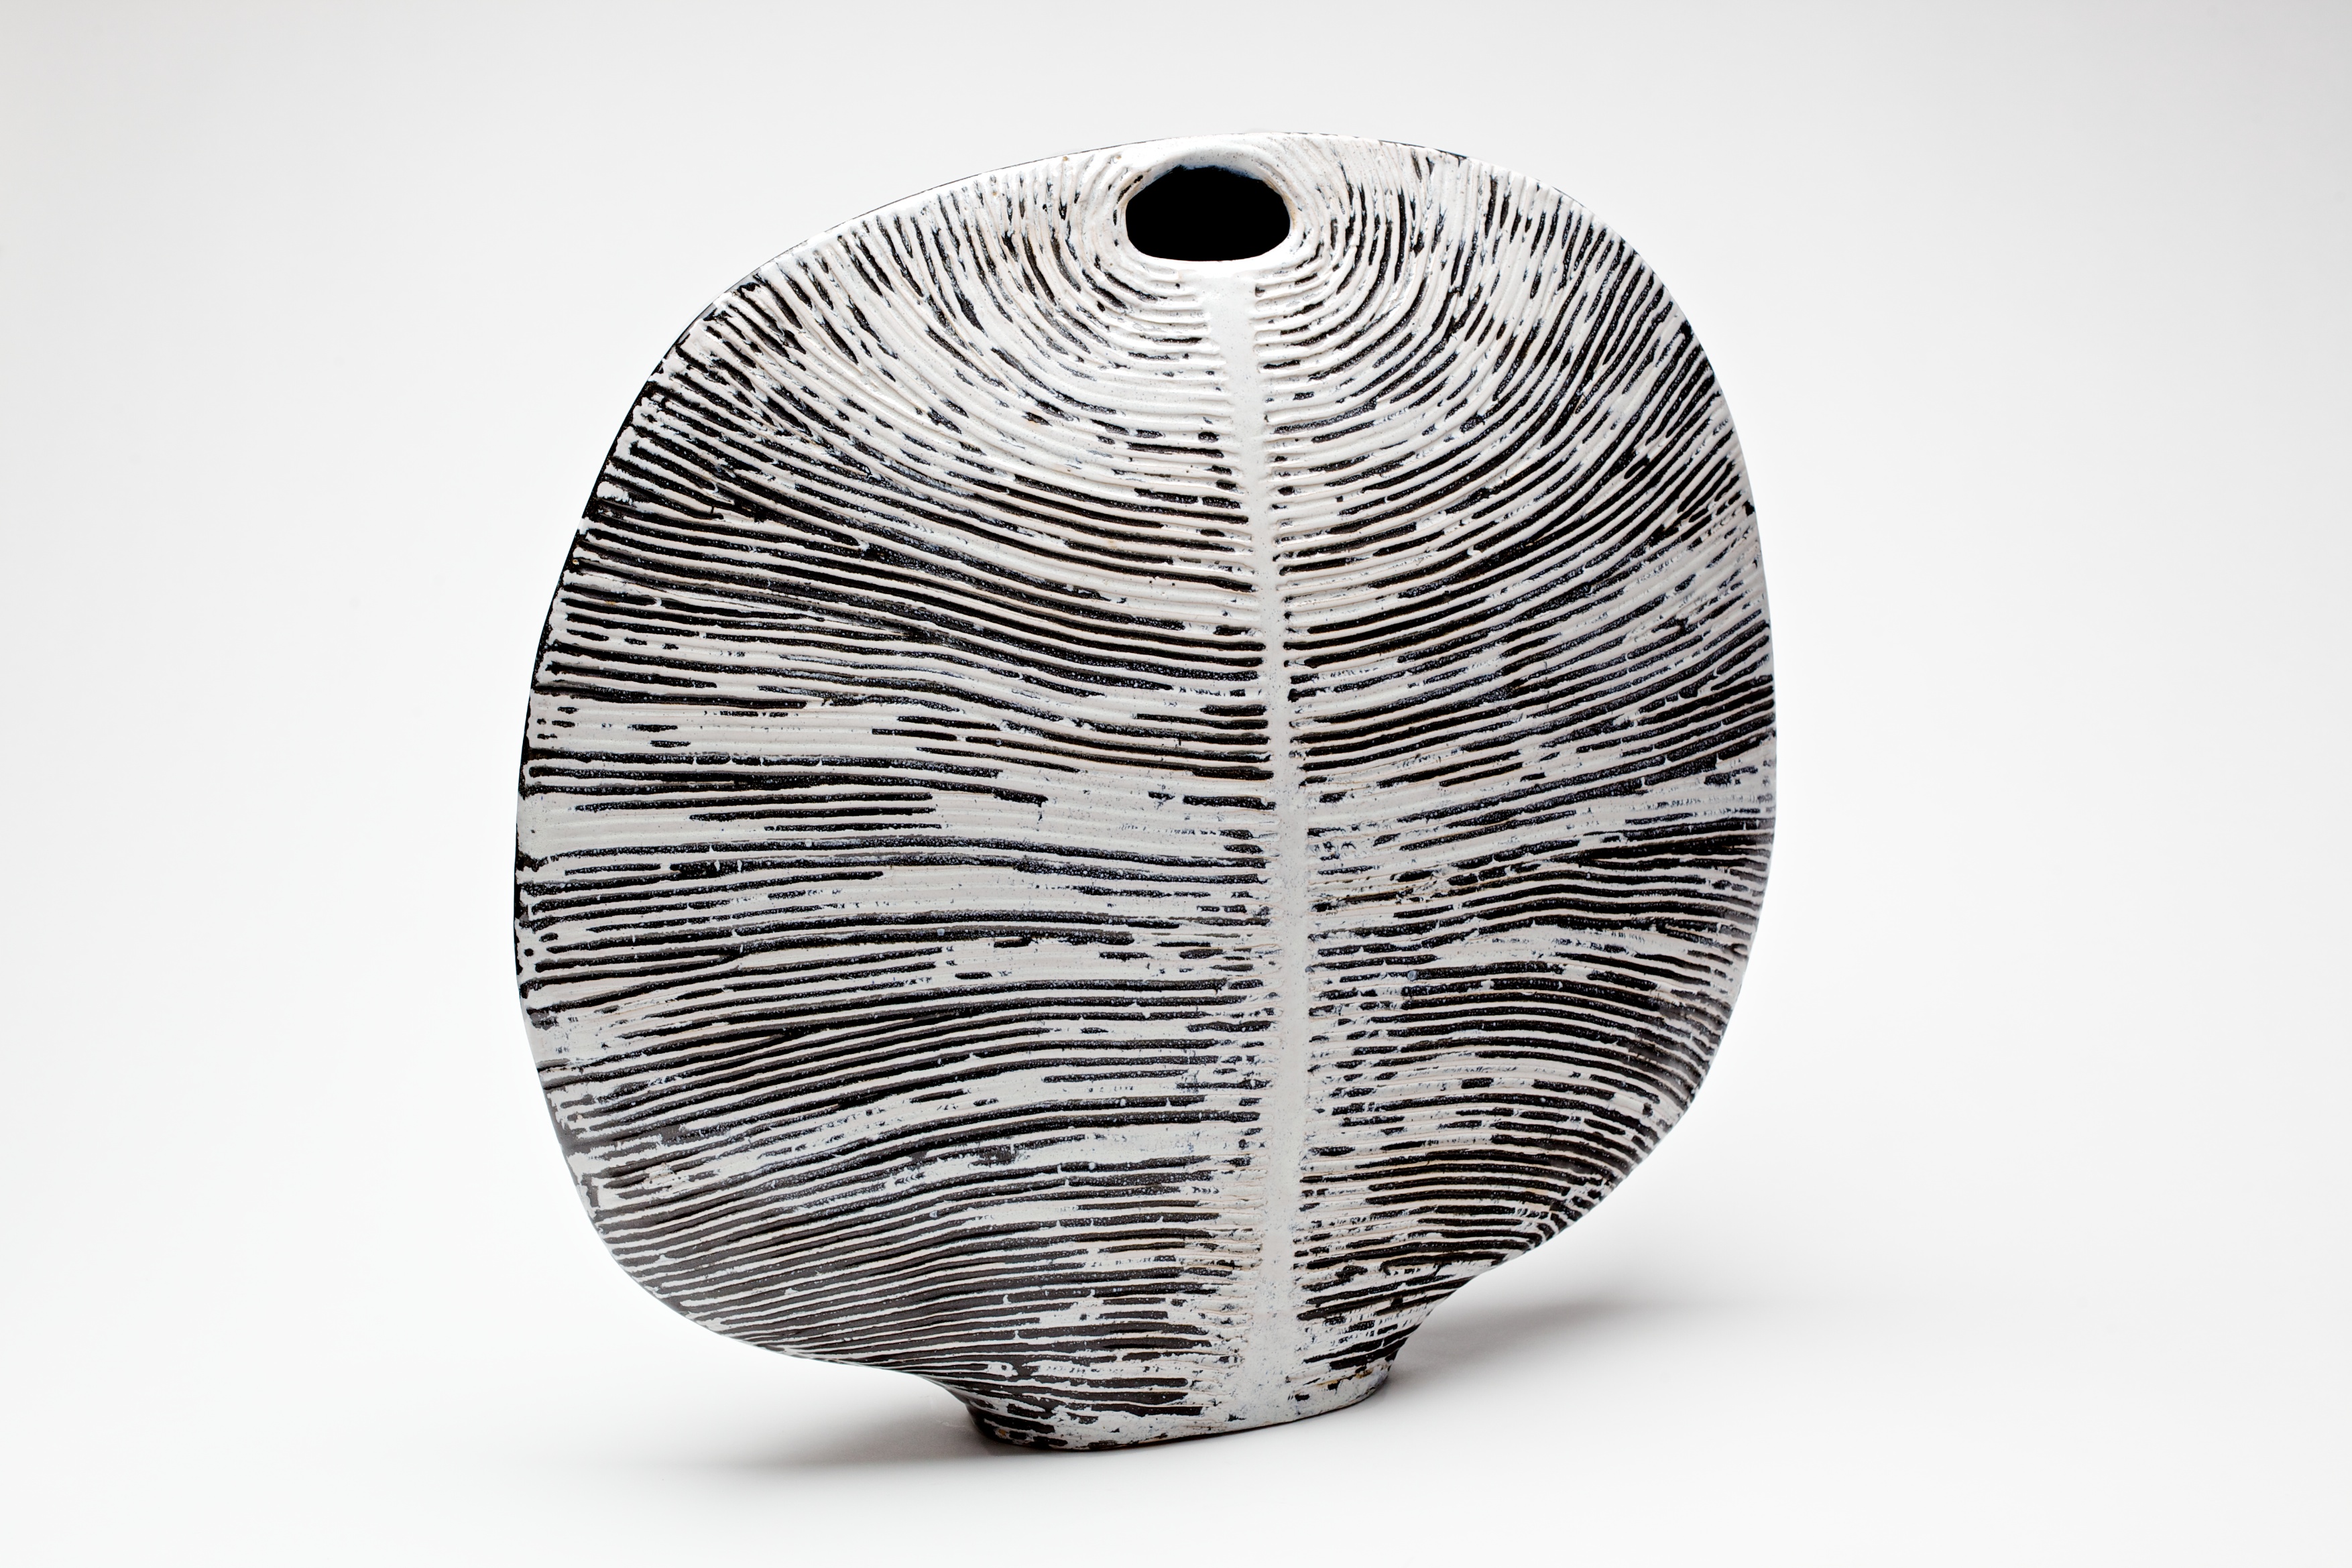 Oval Ridged Form (black and white) (1985)